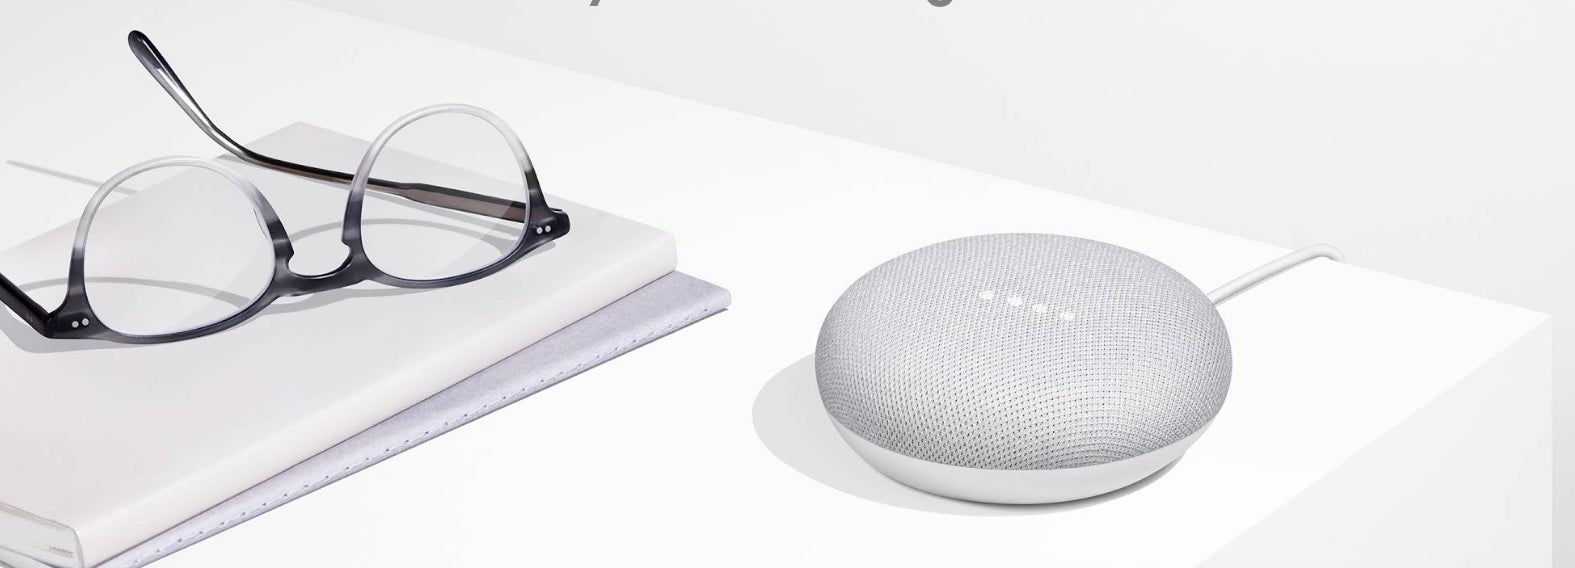 Google is giving away free Home Minis to YouTube Premium members and Google Assistant users - Google is rewarding some Assistant and YouTube users with free Home Mini speakers